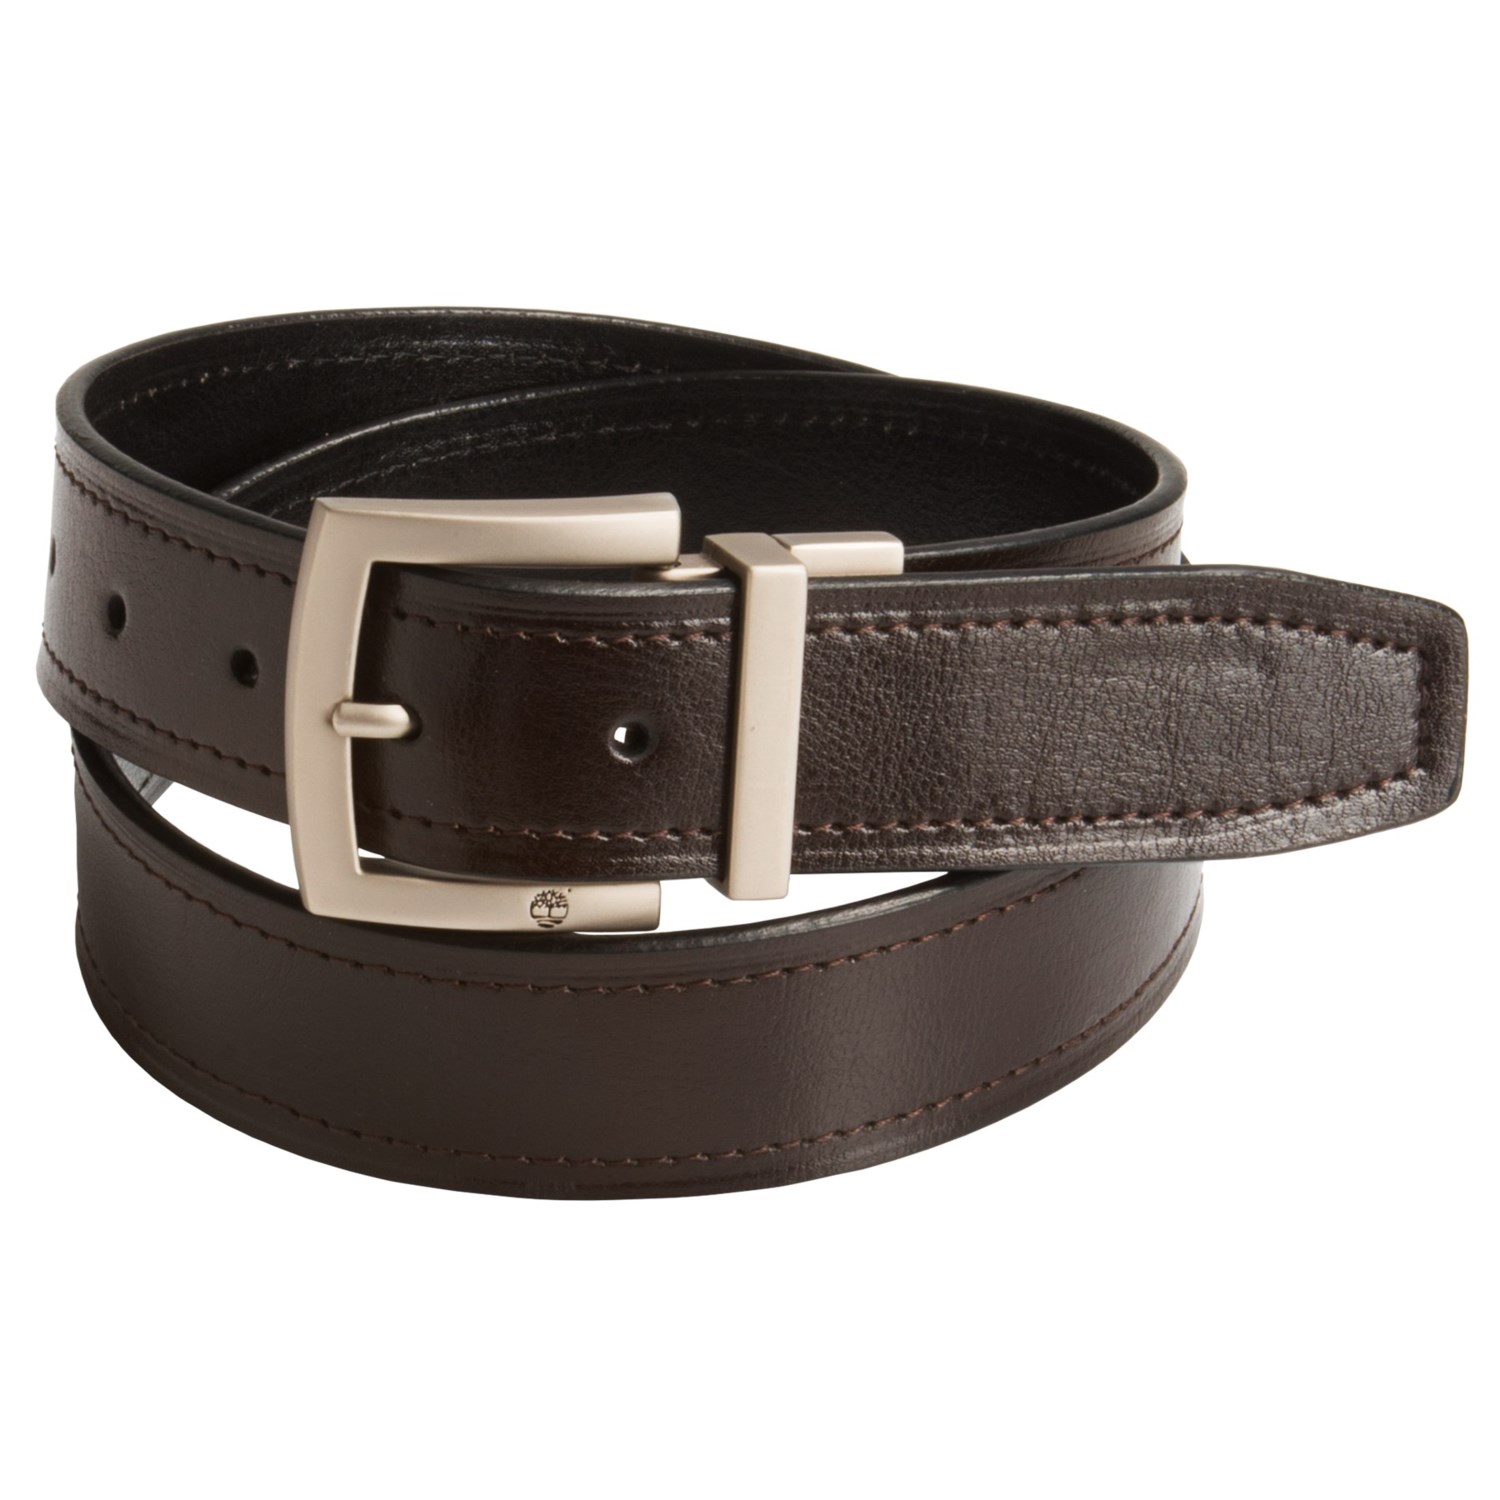 Timberland Reversible Leather Belt (For Men) 8576T - Save 61%